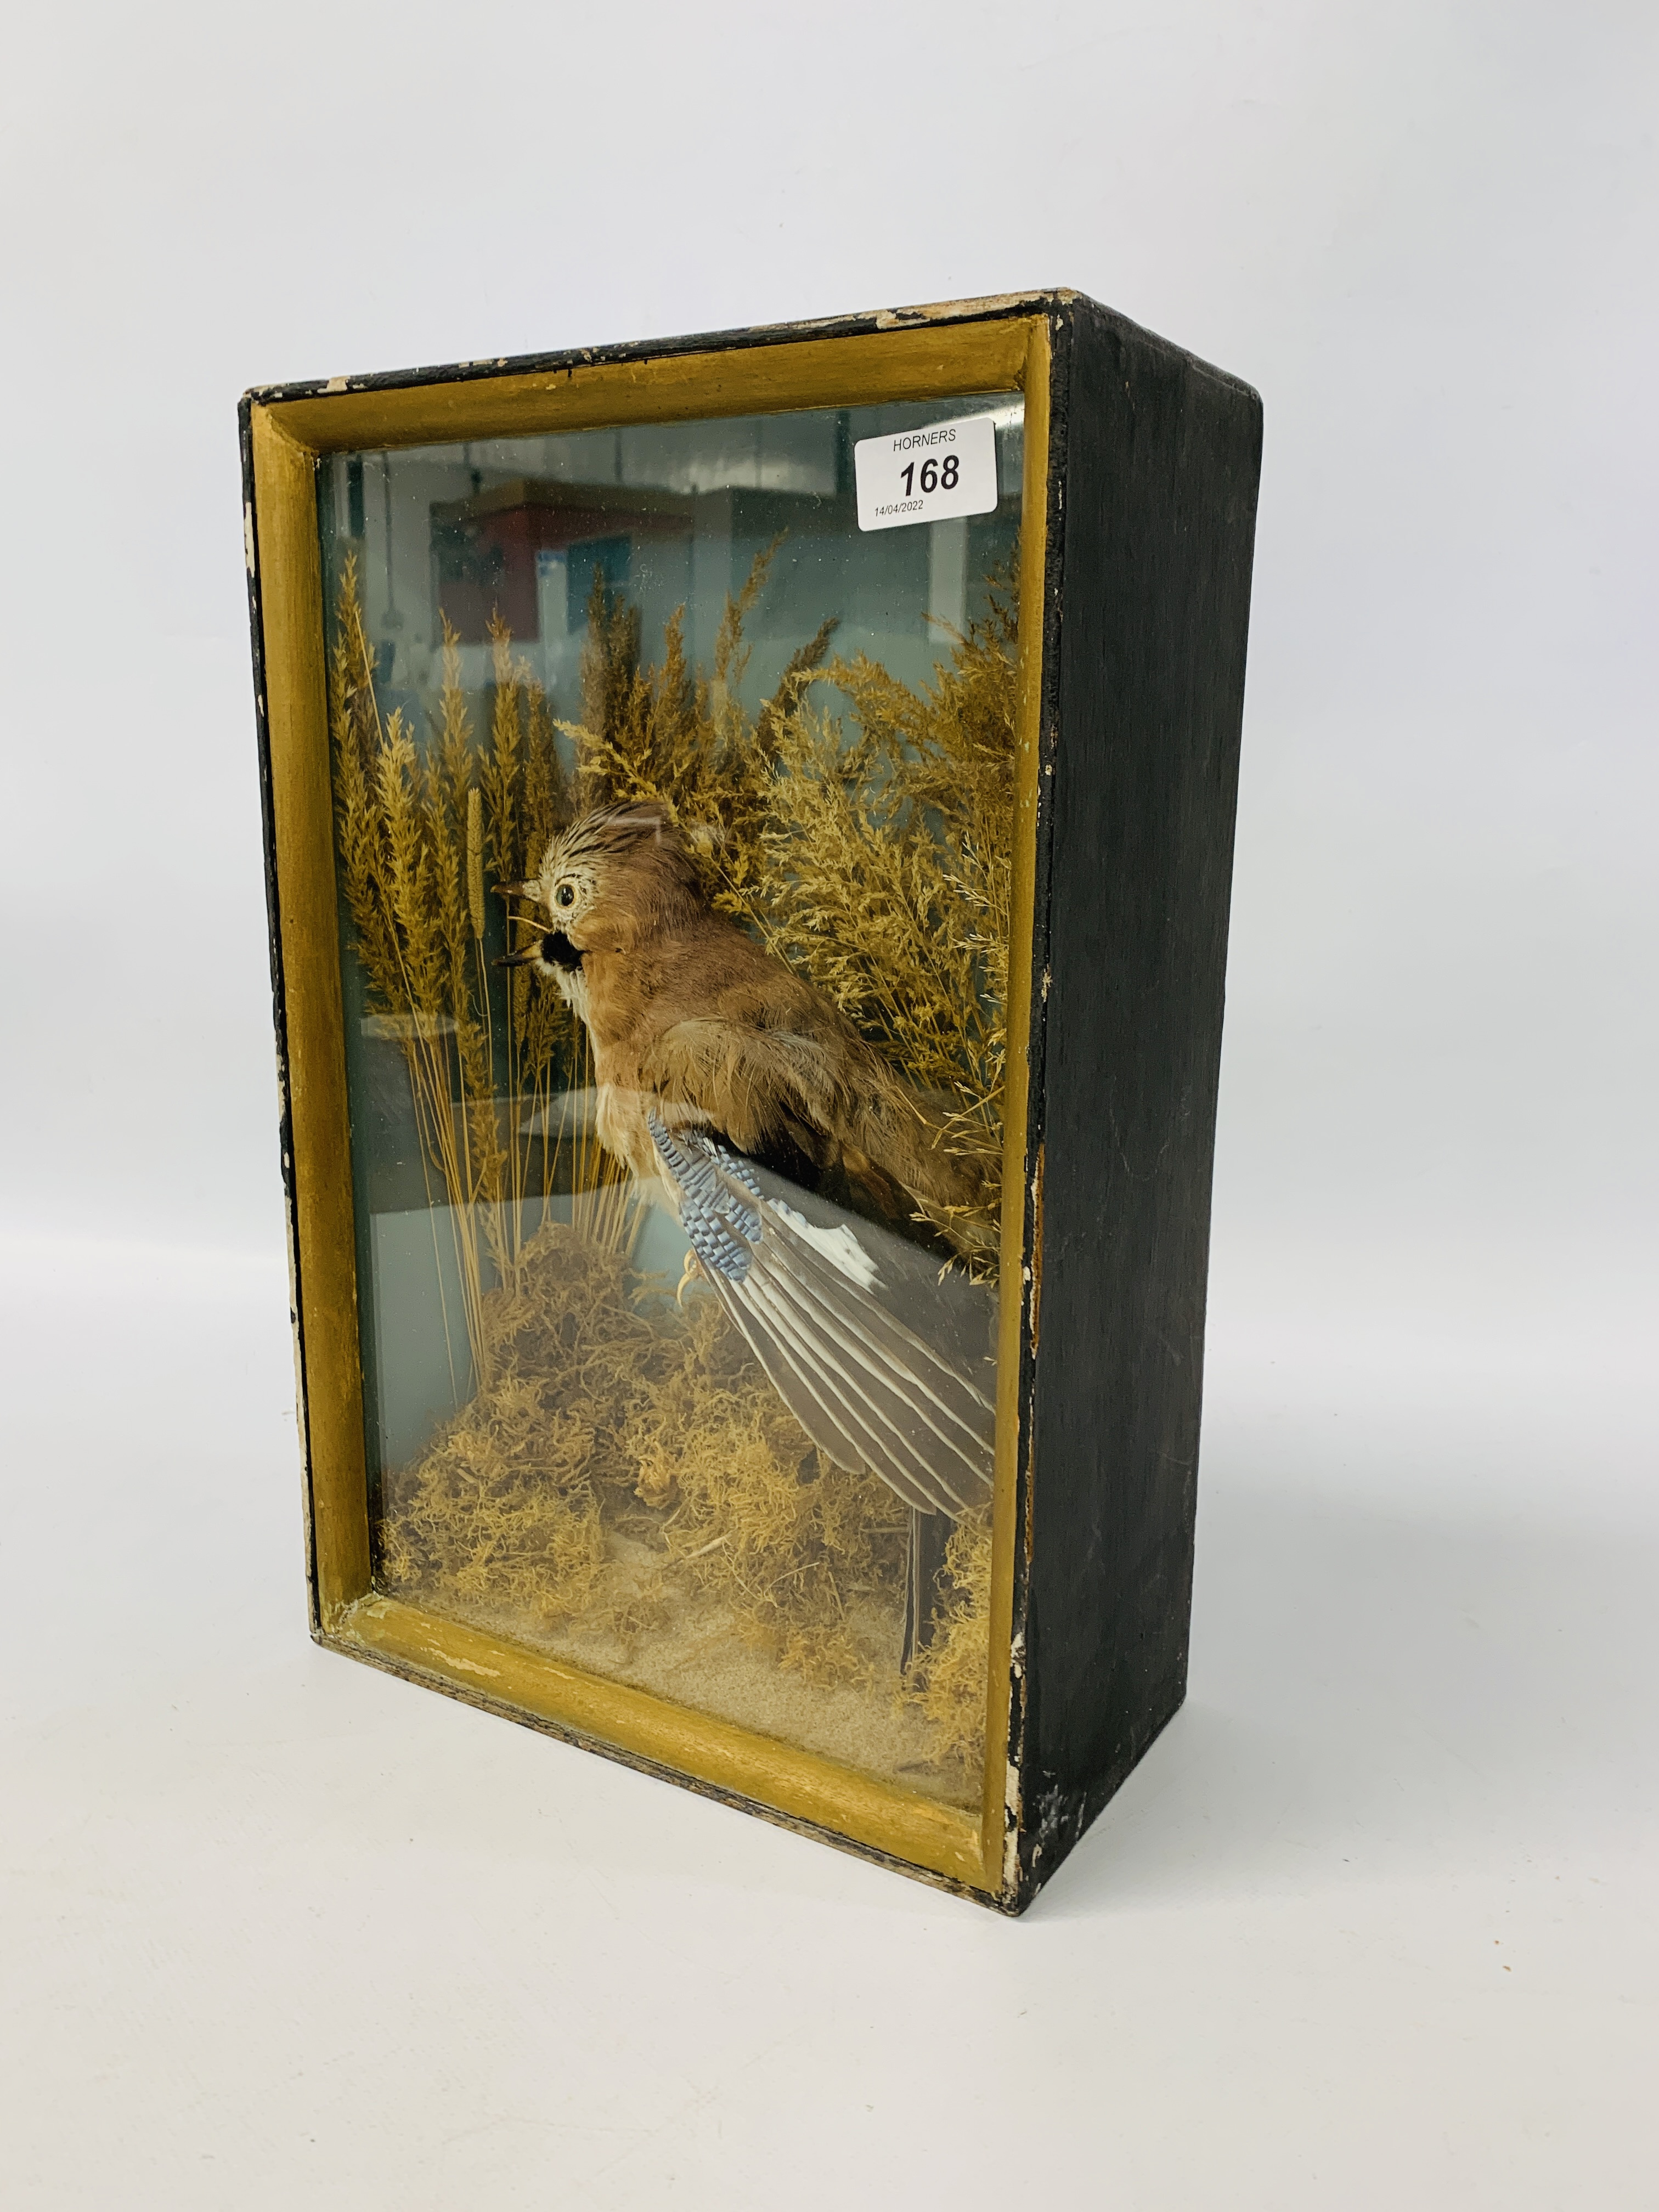 A CASED TAXIDERMY STUDY OF A "JAY" (CASE WIDTH 27CM. HEIGHT 40CM. - Image 5 of 5